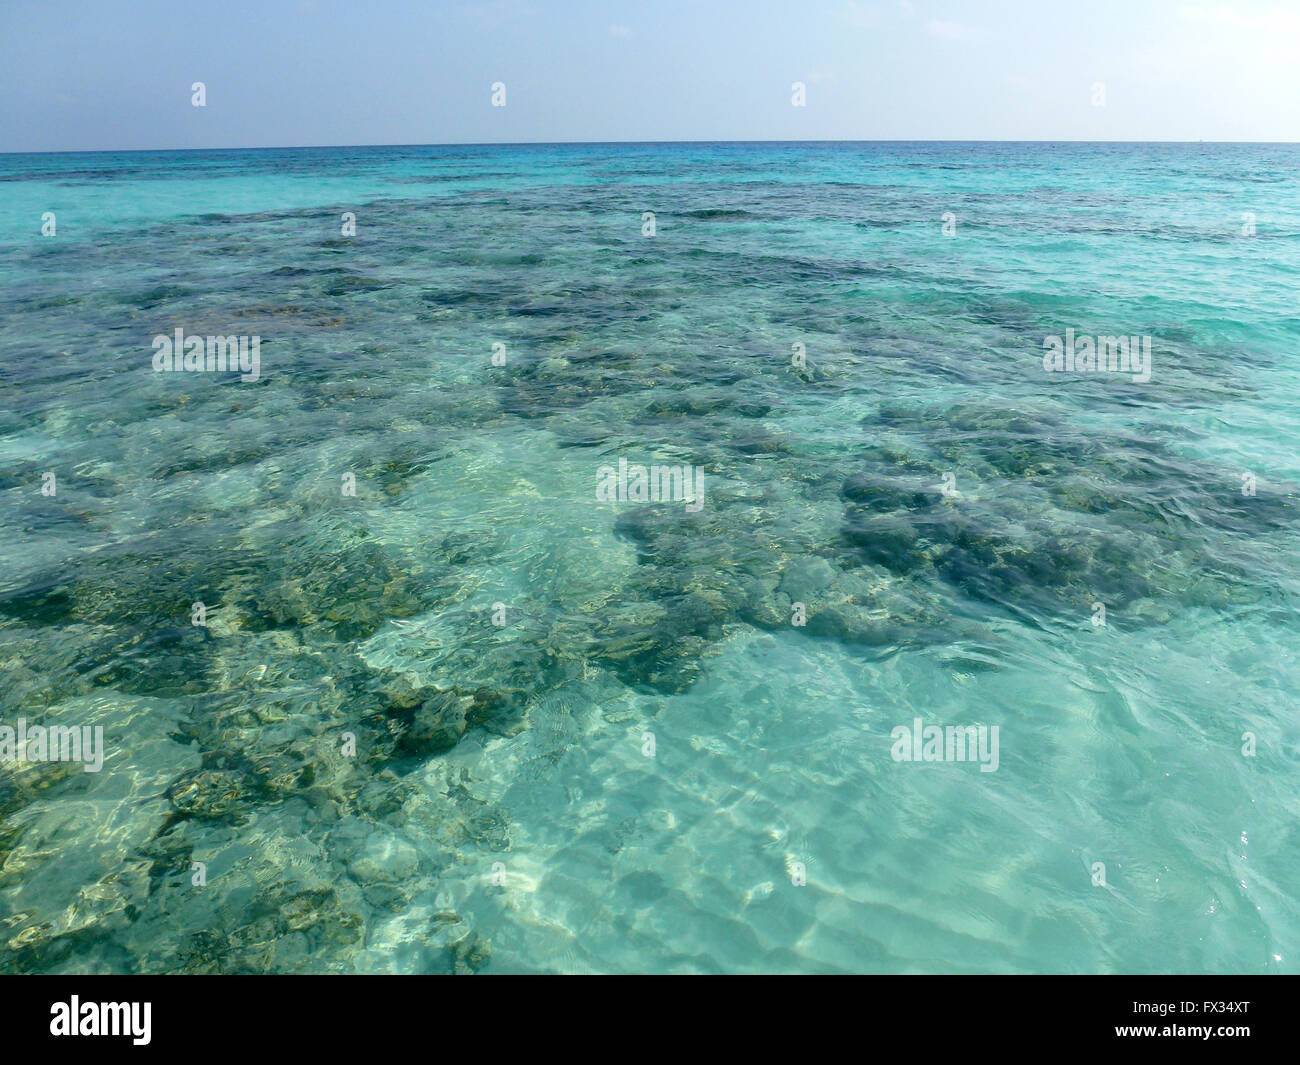 Crystal clear water off Koh Tachai island, Thailand, 15 March 2016. Koh Tachai is located outside of the actual Similan Islands and is the northernmost part of the national park of the same name. Photo: ALEXANDRA SCHULER/dpa - NO WIRE SERVICE - Stock Photo